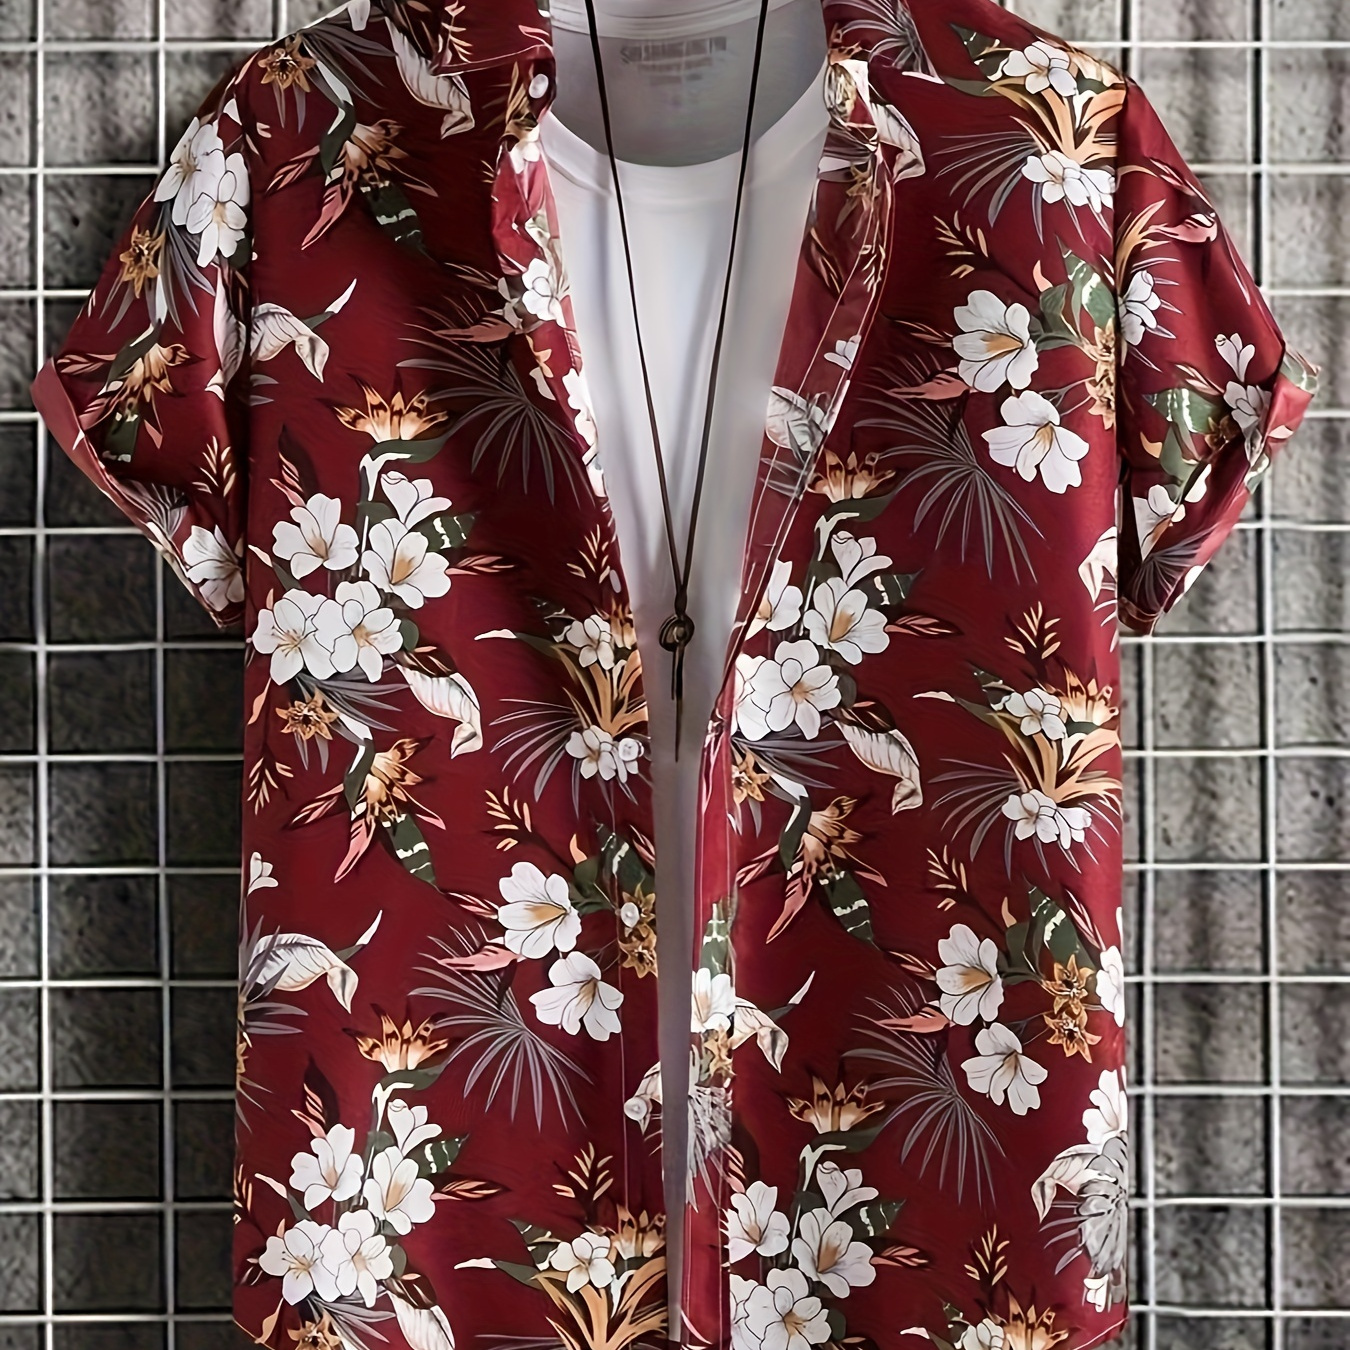 

Men's Hawaiian Floral Graphic Pattern Print Shirt With Lapel Collar Short Sleeve And Button Down Placket, Casual And Chic Shirt For Summer Leisurewear And Vacation